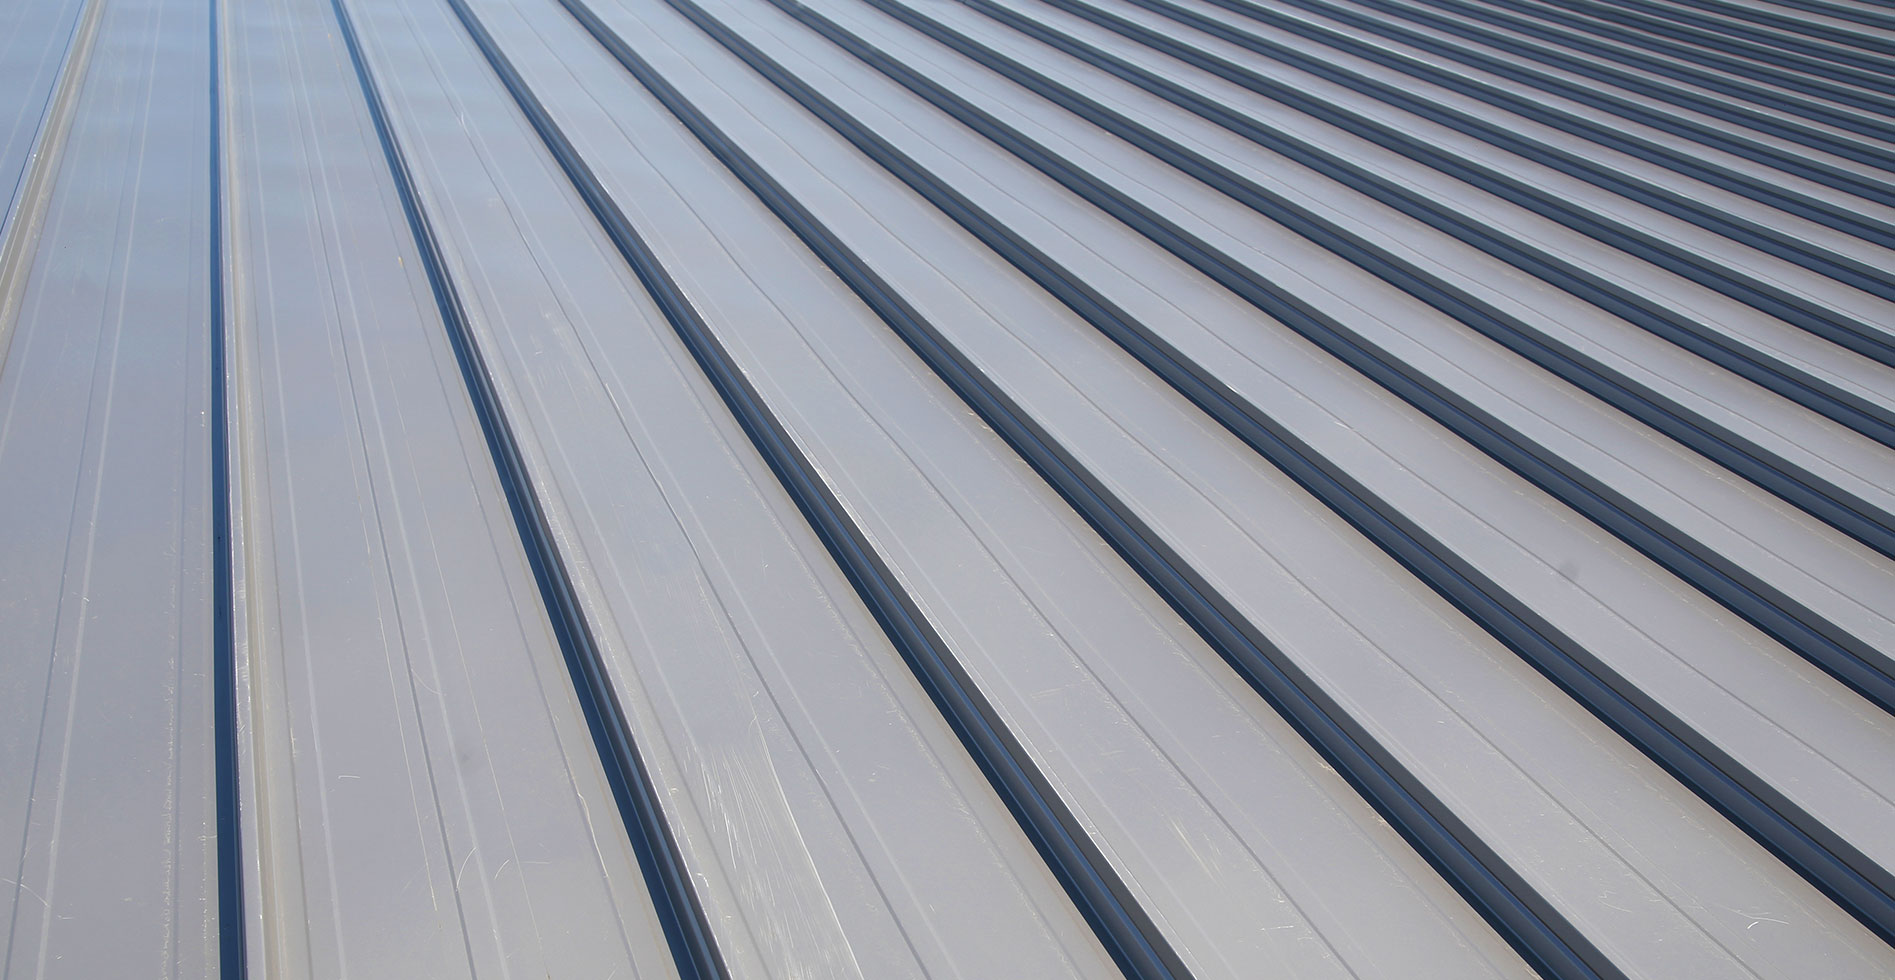 Metal roofing zoomed in - manufacturing facility